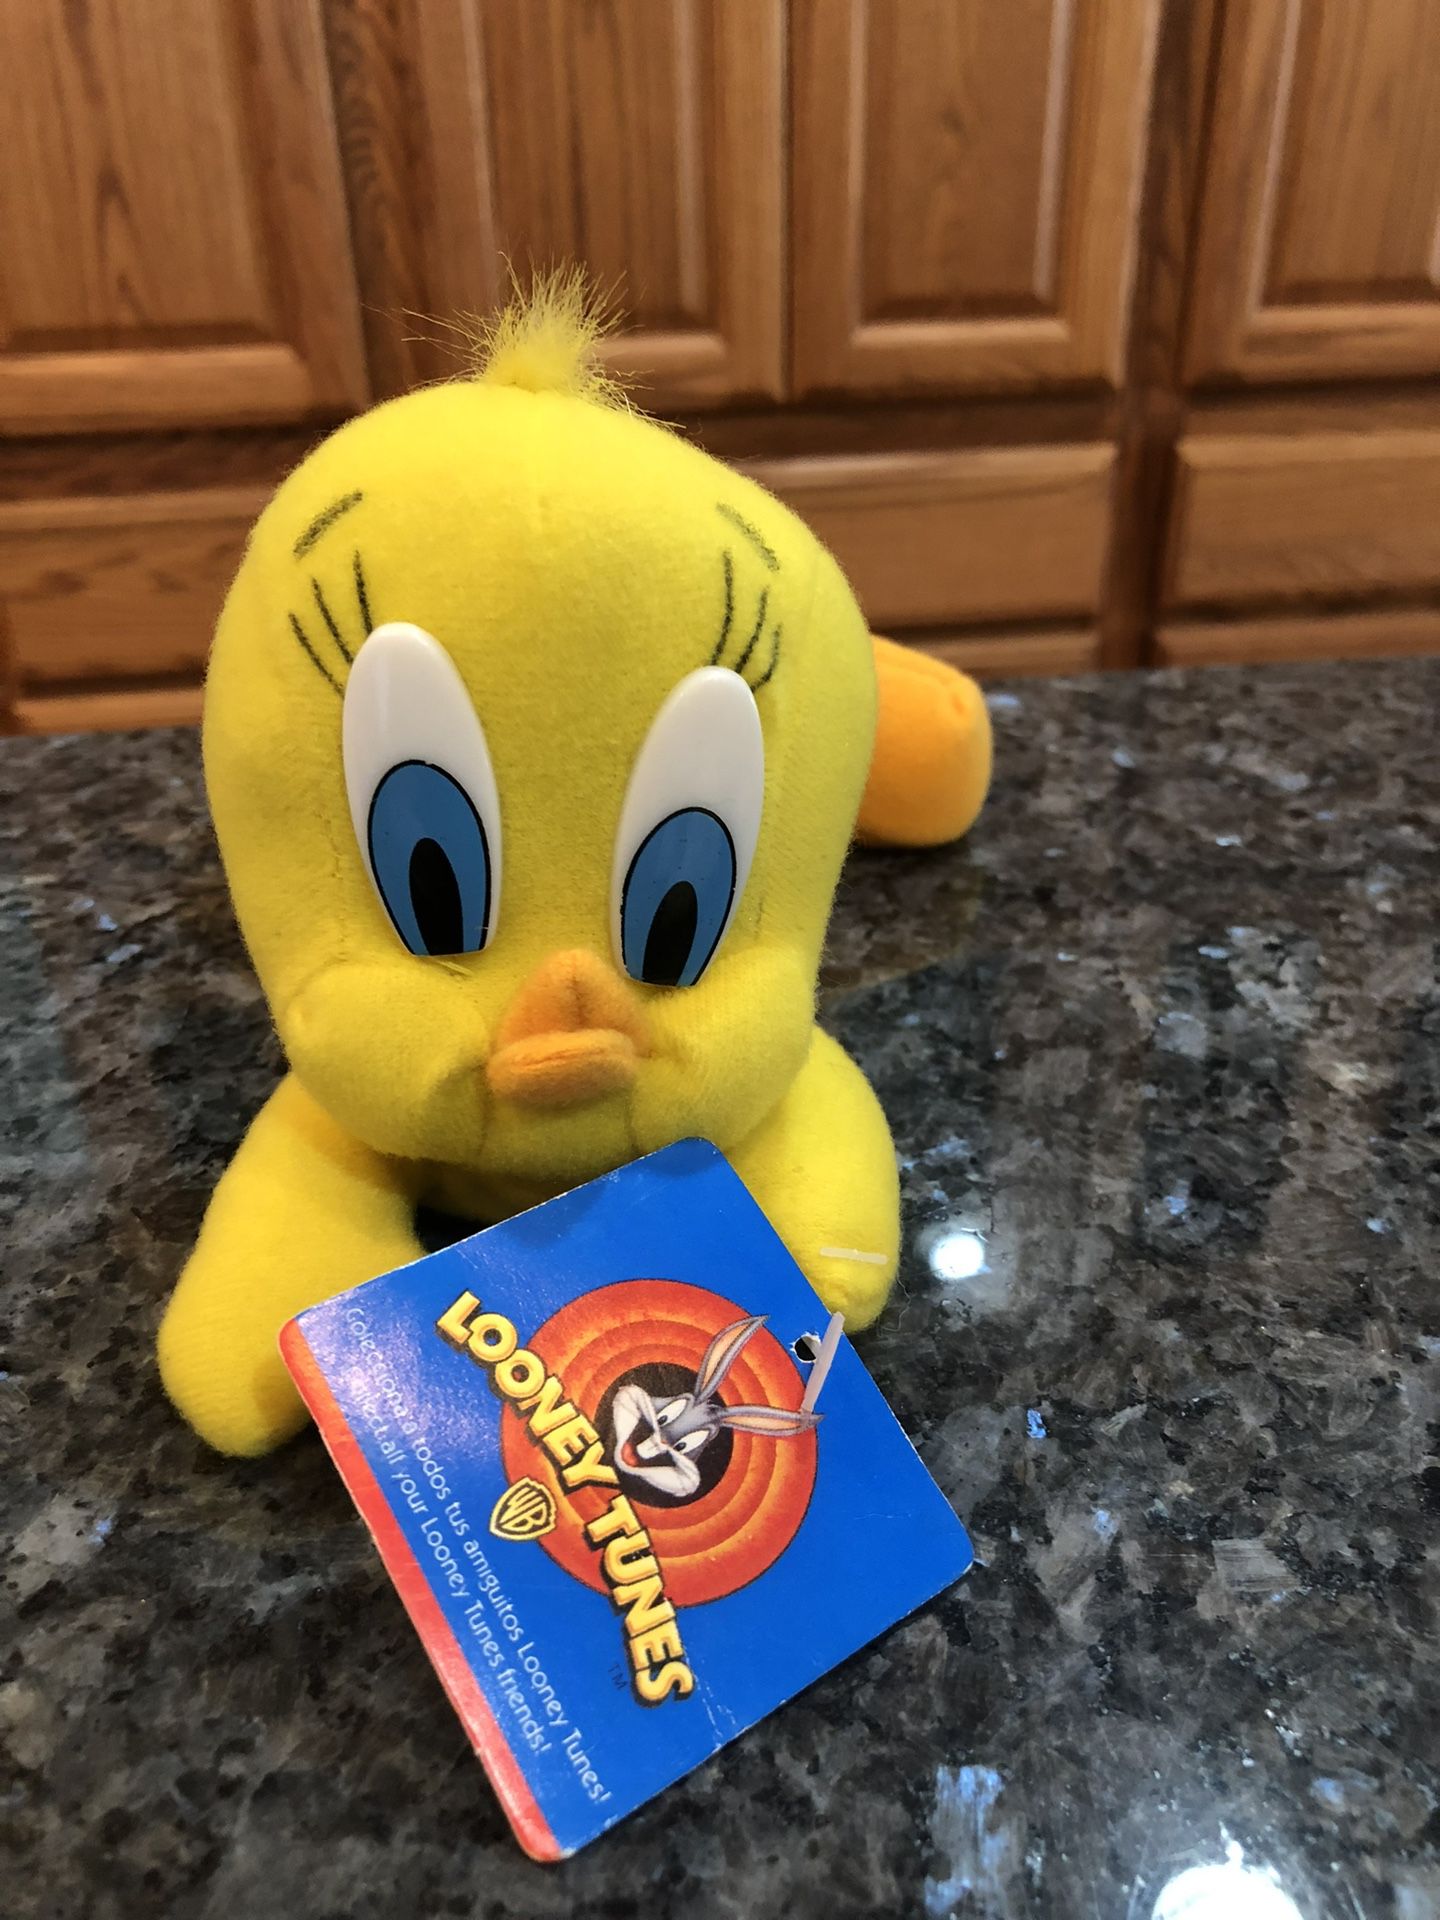 Vintage Looney Tunes Plush Tweety Bird.  1997.  Size 7 inches .  Brand New With Tags . Has Been On Display In A Cabinet 